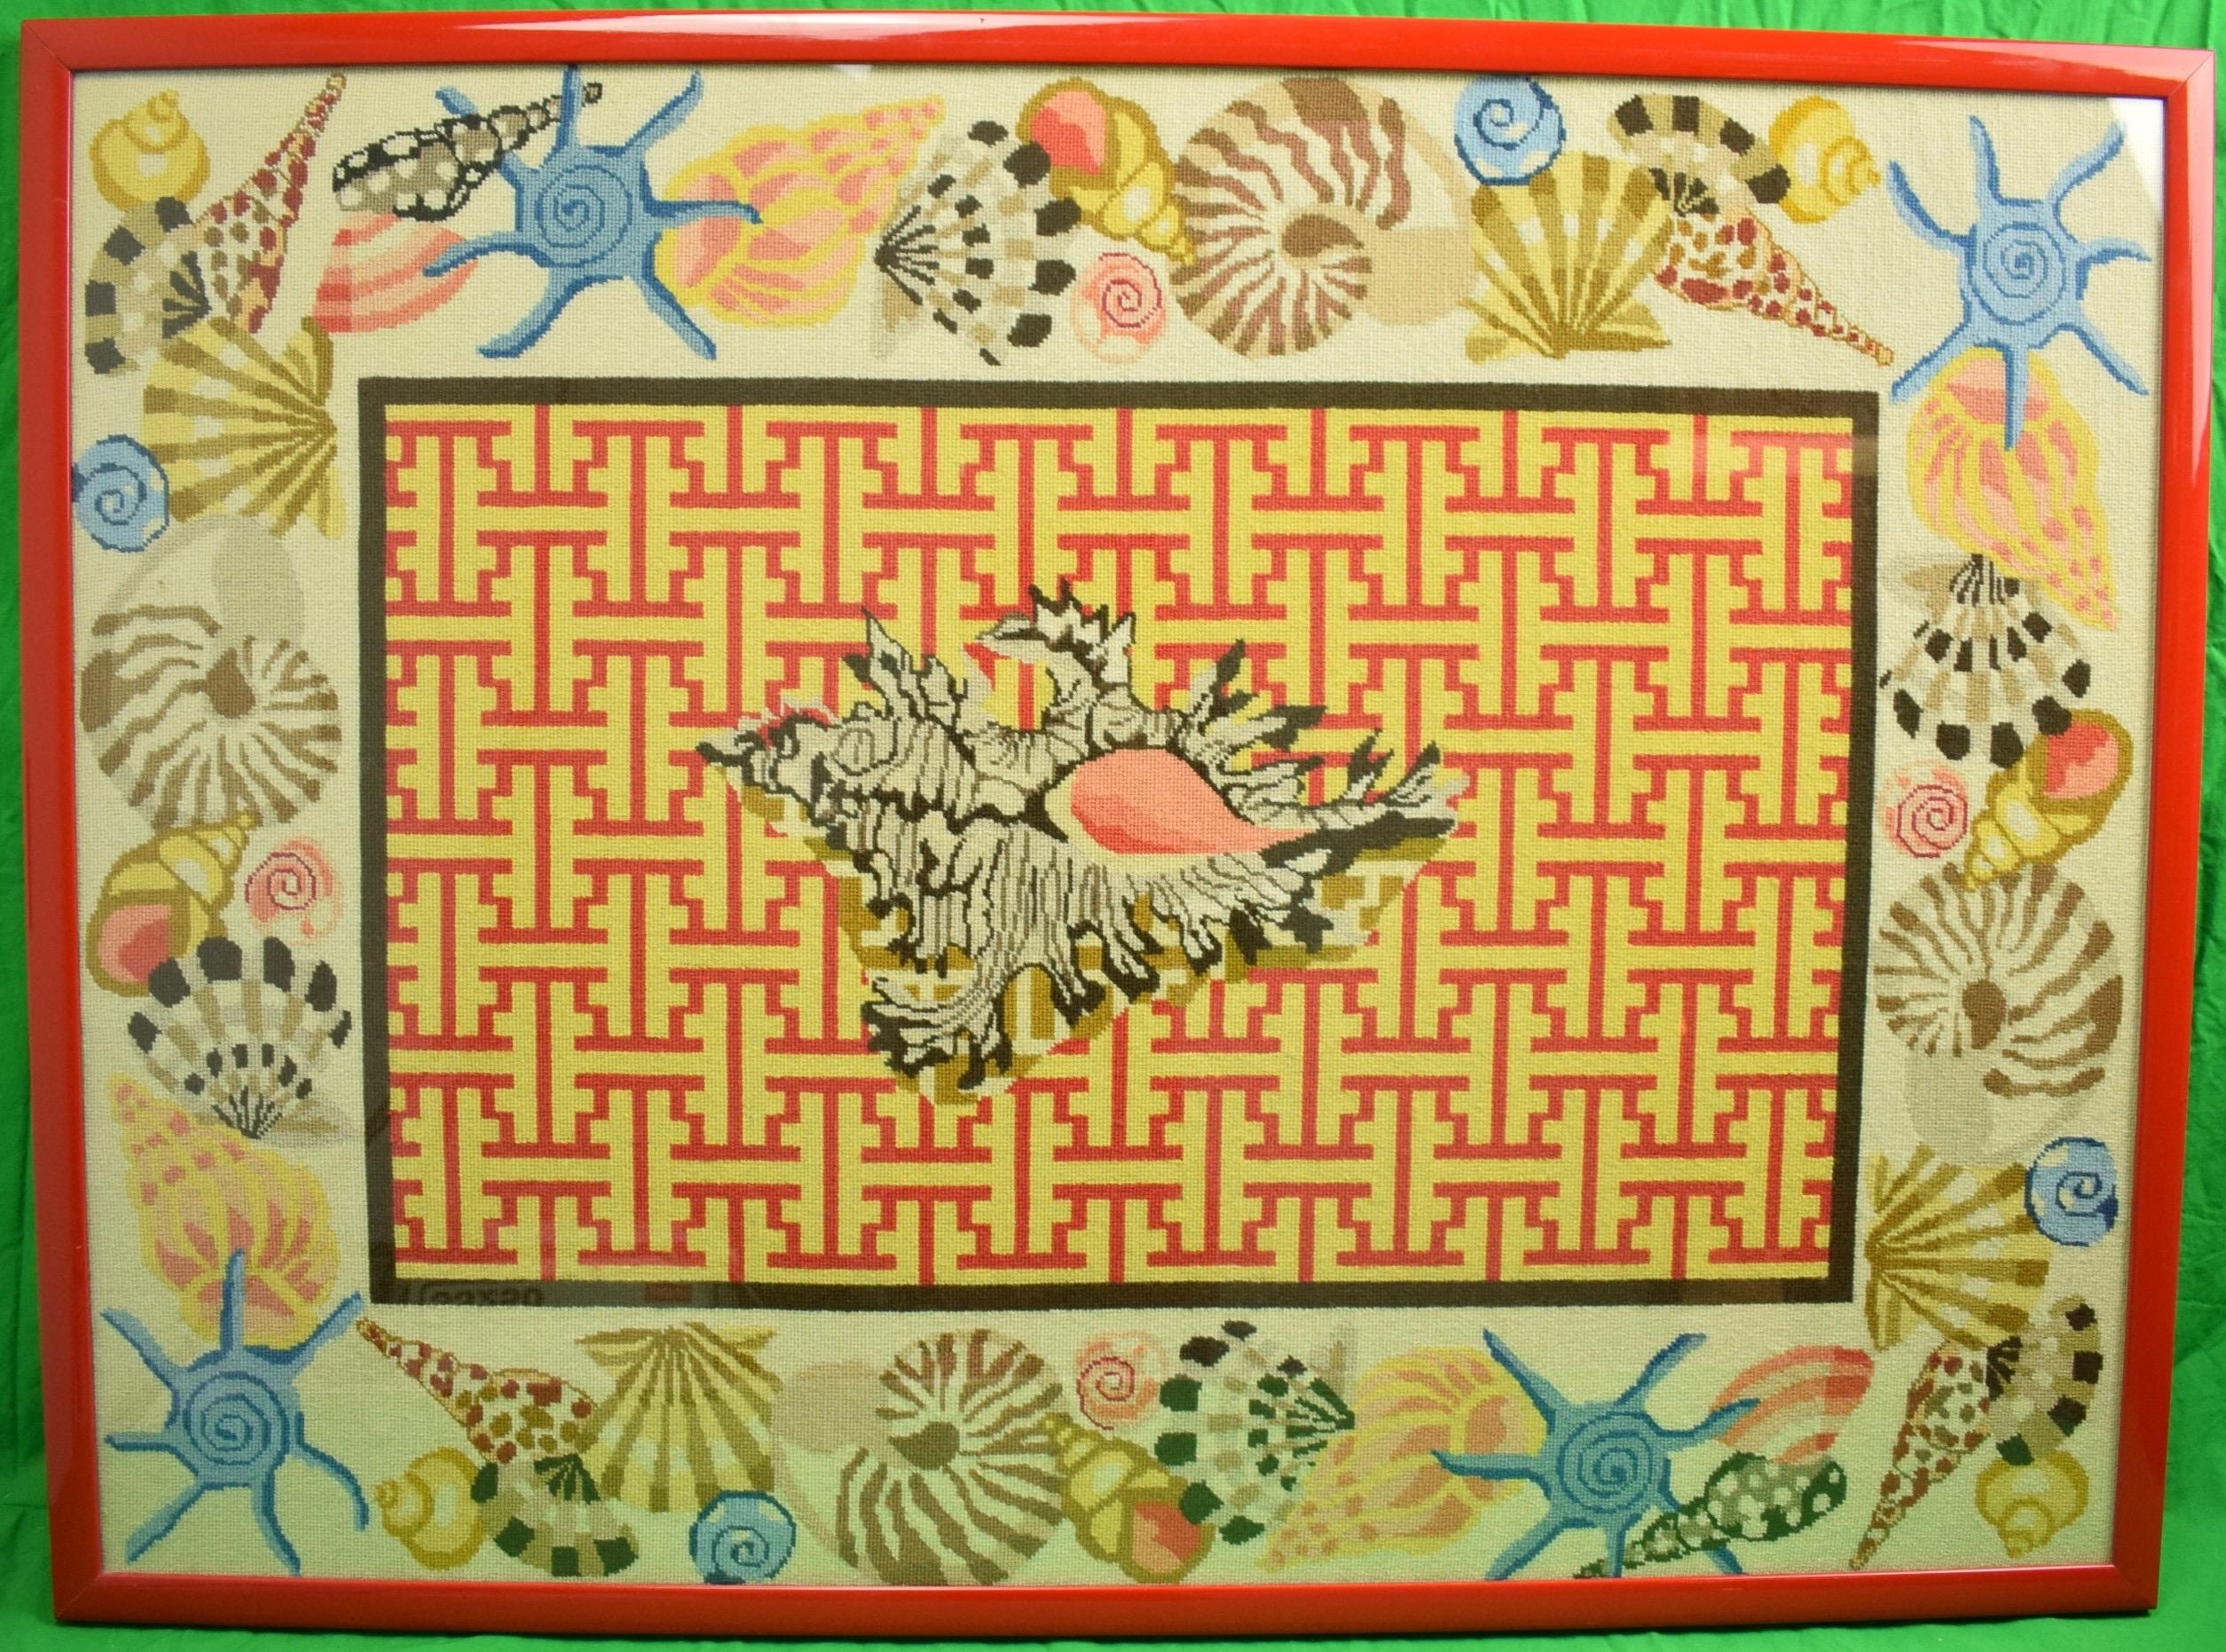 Colourful hand-needlepoint c1960s panel depicting (48) shells surrounding a red & yellow Chinoiserie maze with a 15